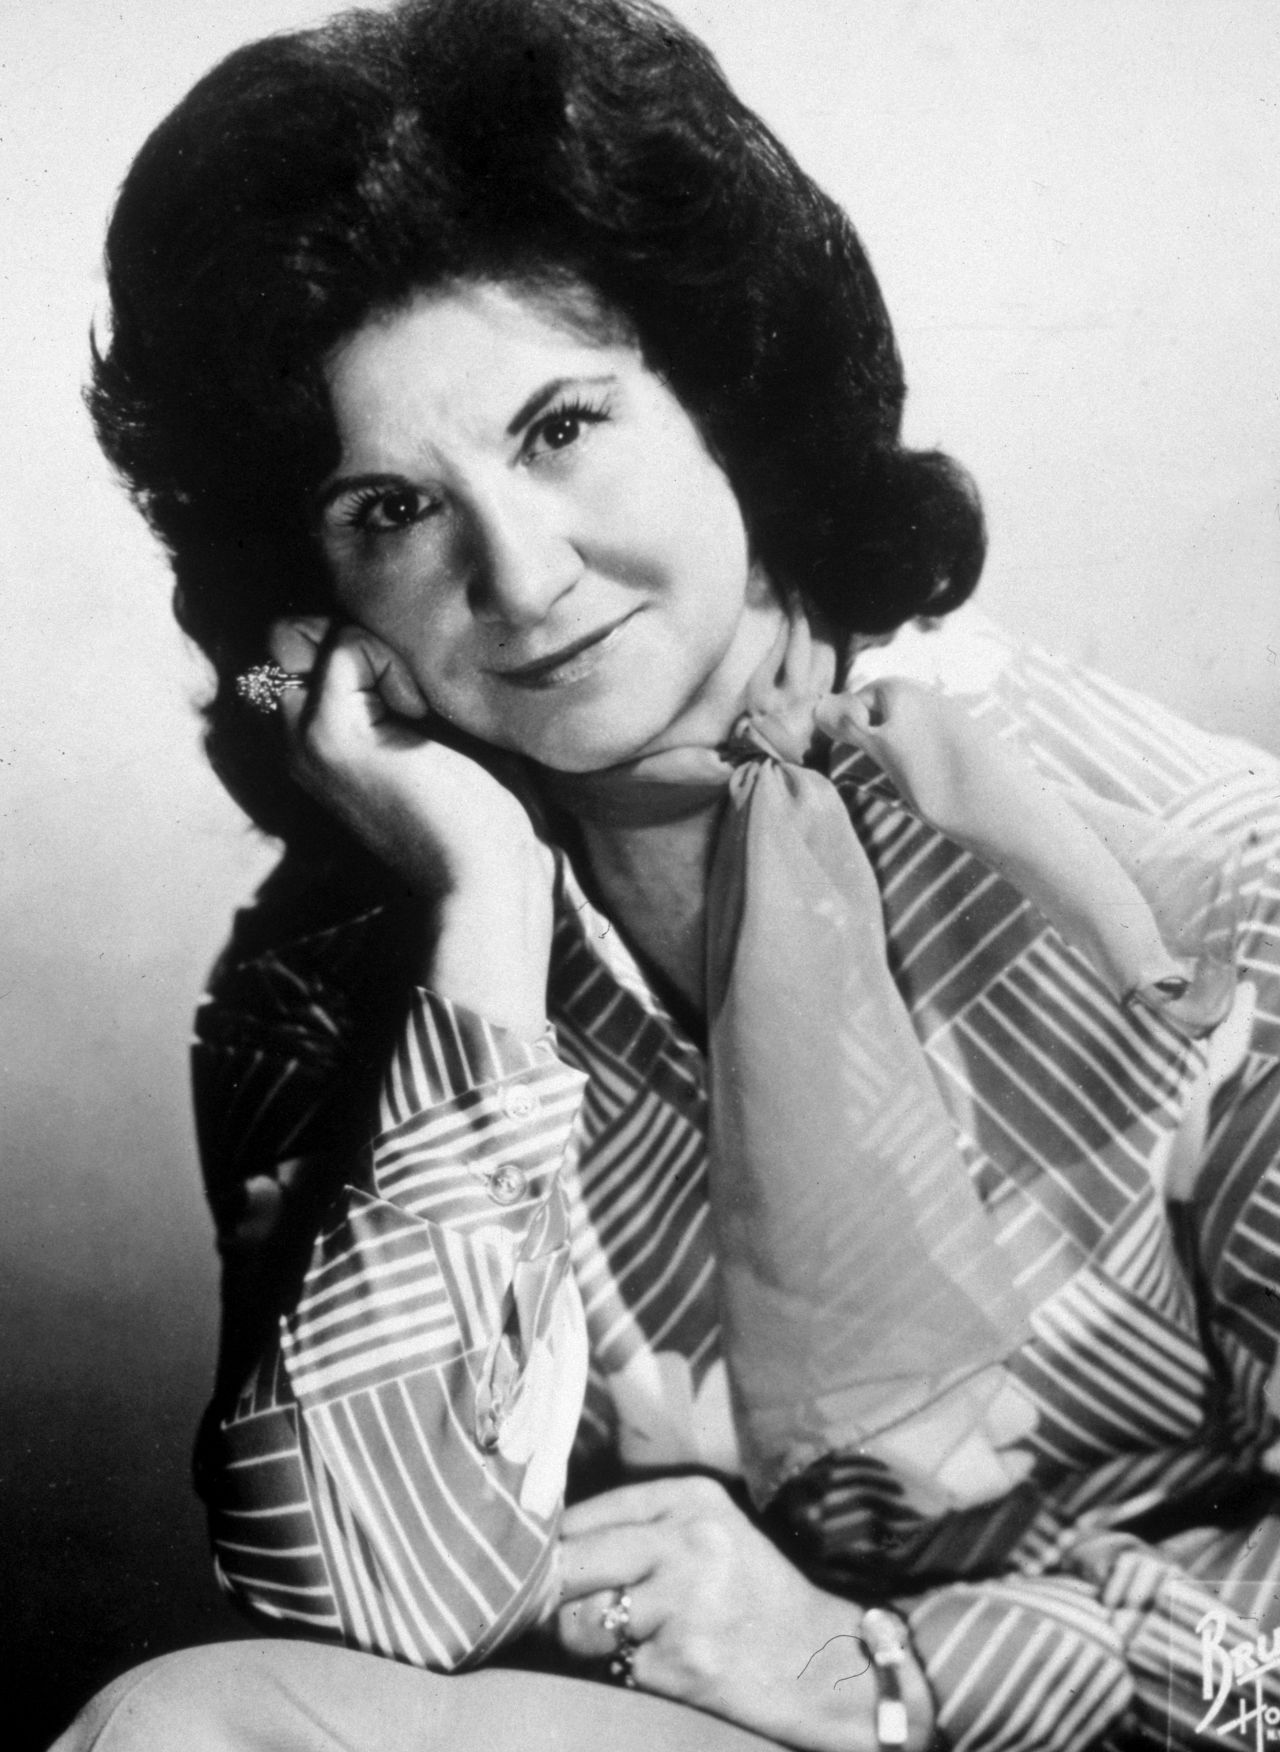 <a href="http://marquee.blogs.cnn.com/2012/07/16/country-mourns-loss-of-queen-kitty-wells/">Country legend Kitty Wells</a> died on July 16, due to complications from a stroke. She was 92.